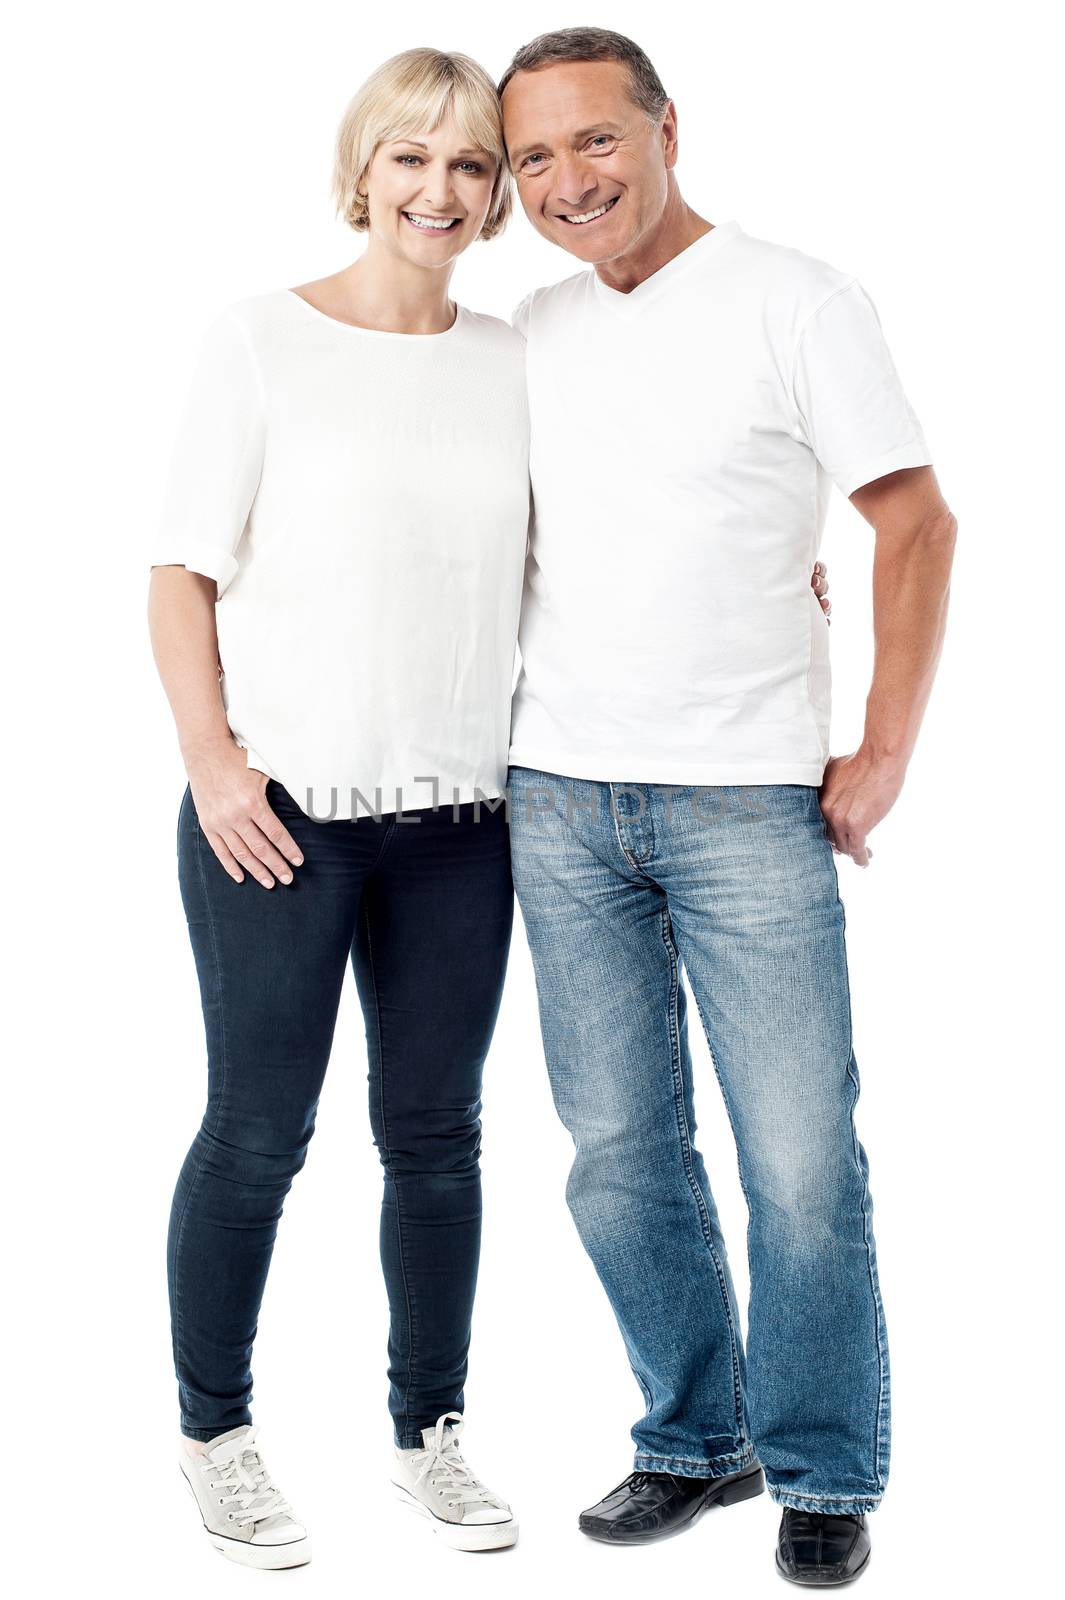 Full length portrait of happy smiling couple standing